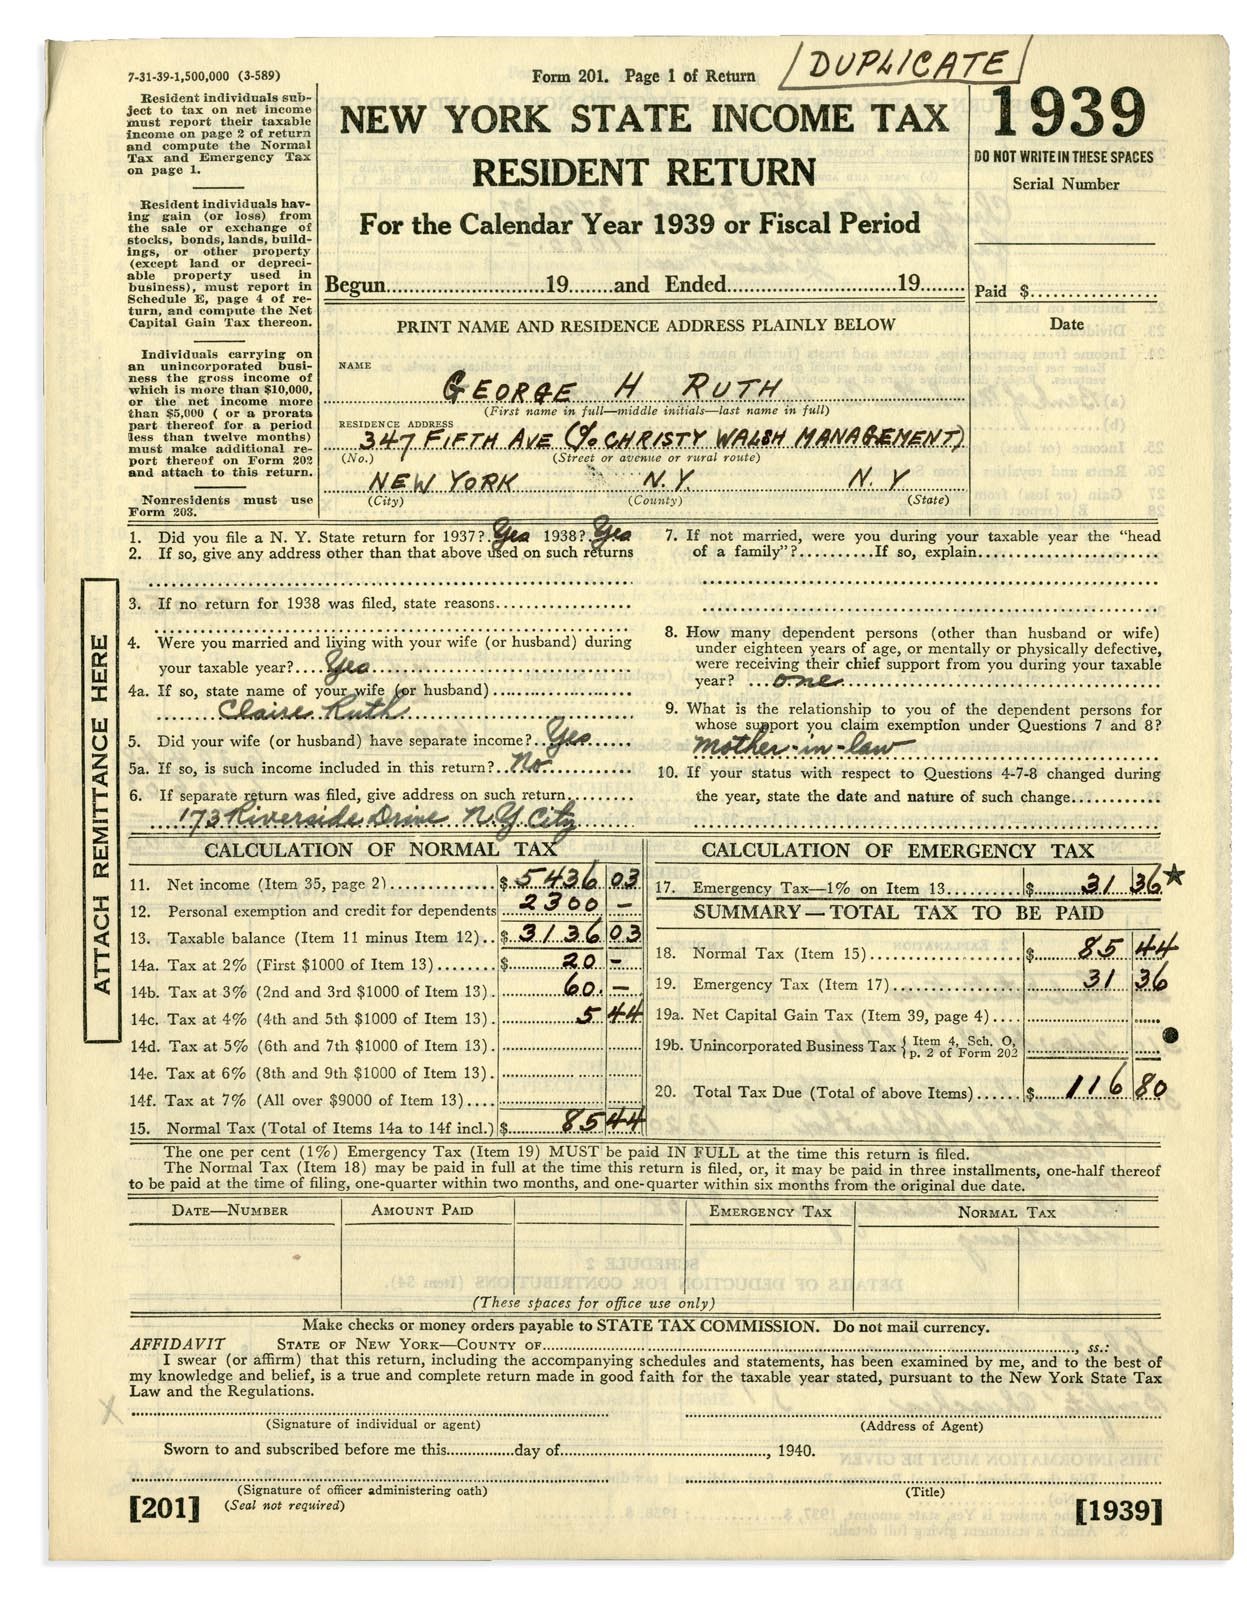 Collection Of Babe Ruth's Right Hand Man - Babe Ruth 1939 N.Y. State Income Tax Return - Year of Cooperstown Opening